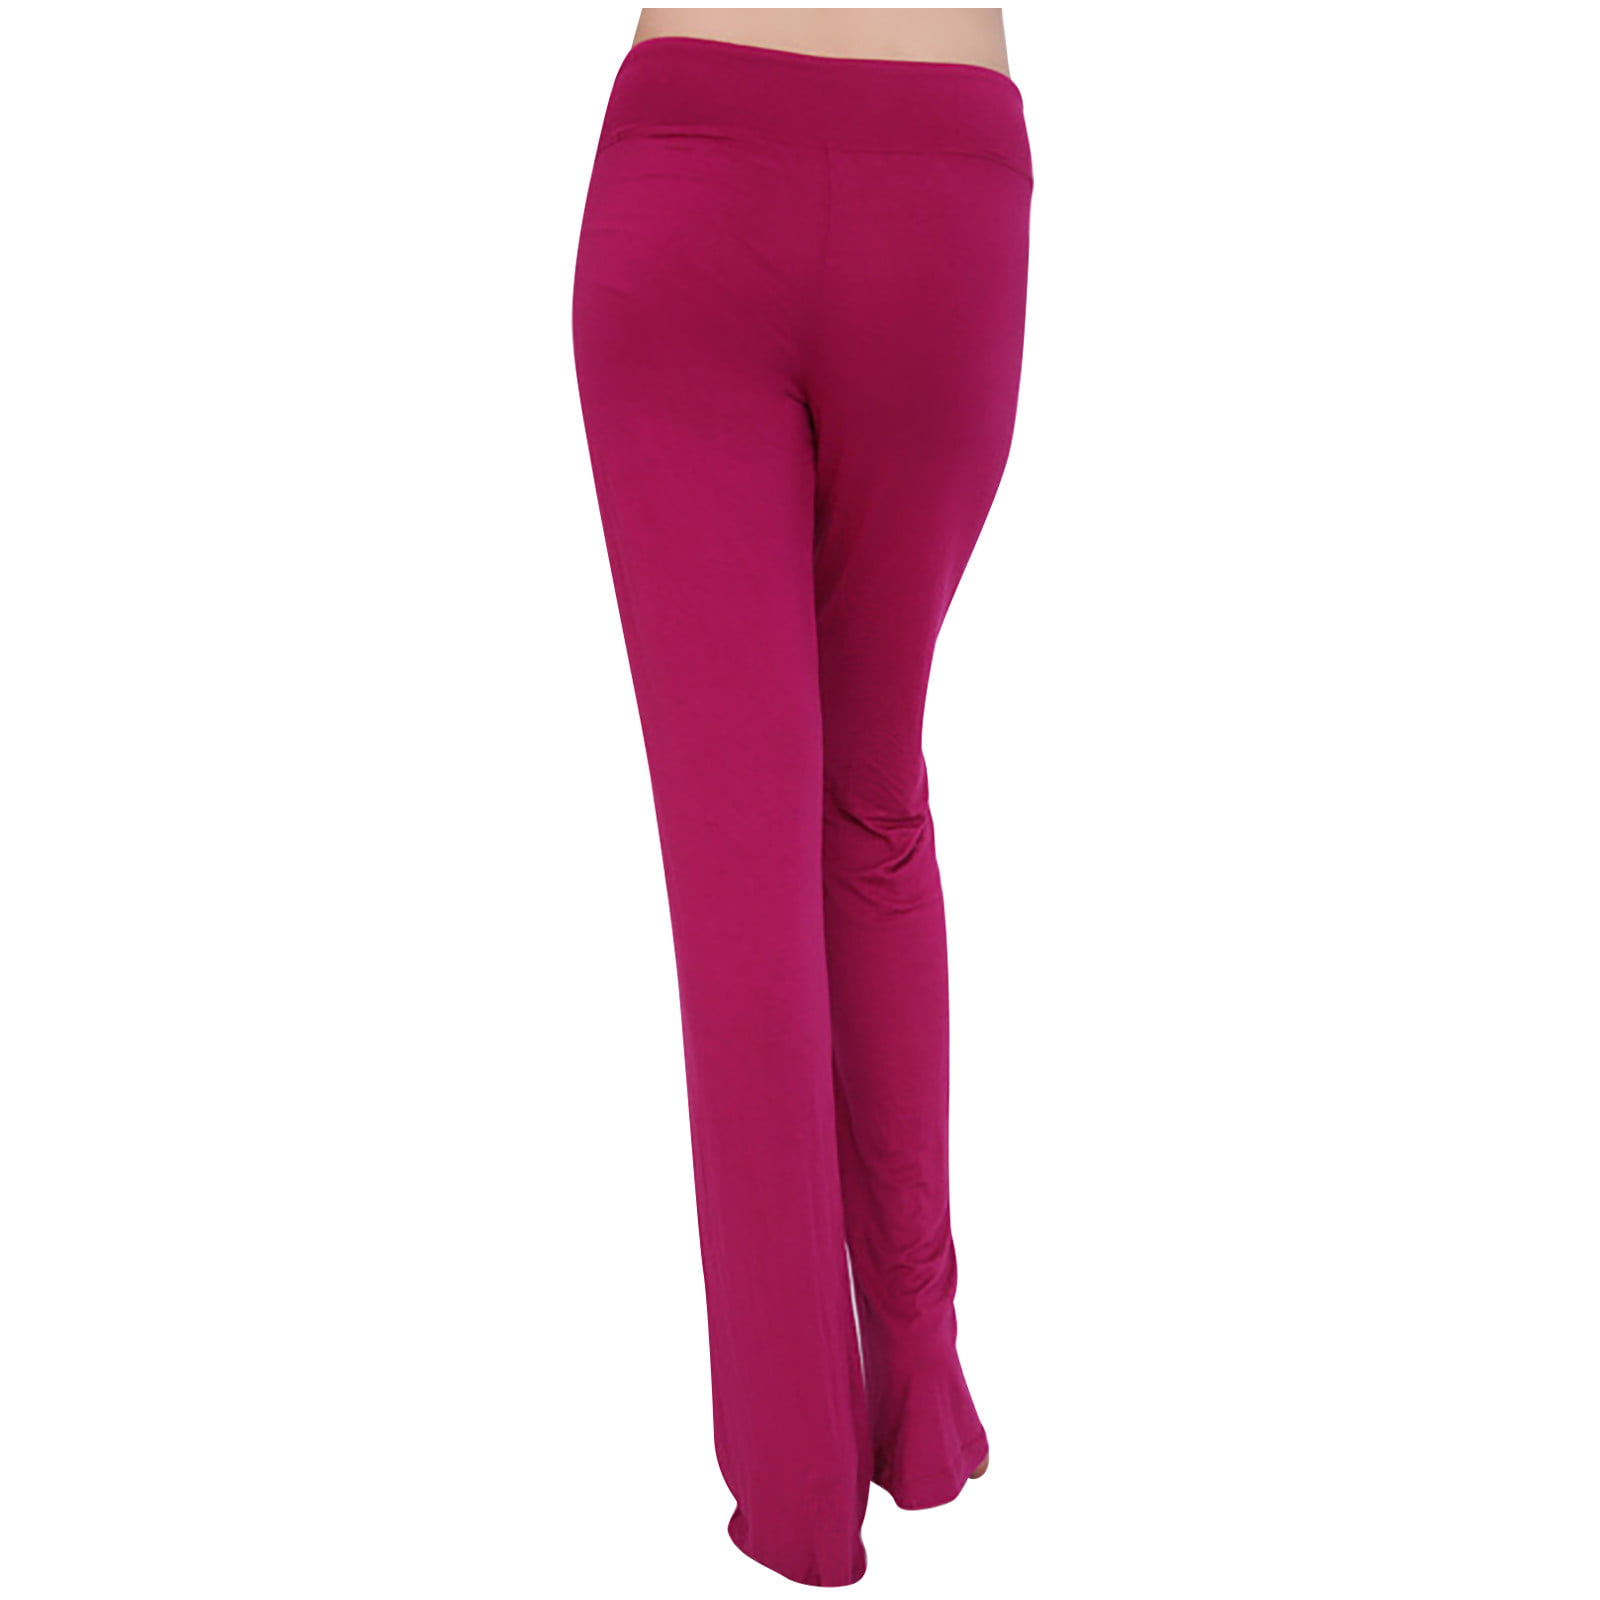 Lu Yoga Studio Pants For Women Quickly Dry, Ll Bean Drawstring Bag, Loose  Fit, Ideal For Yoga, Running, Gym, Fitness, Jogging And Sports From  Hexiang2, $34.96